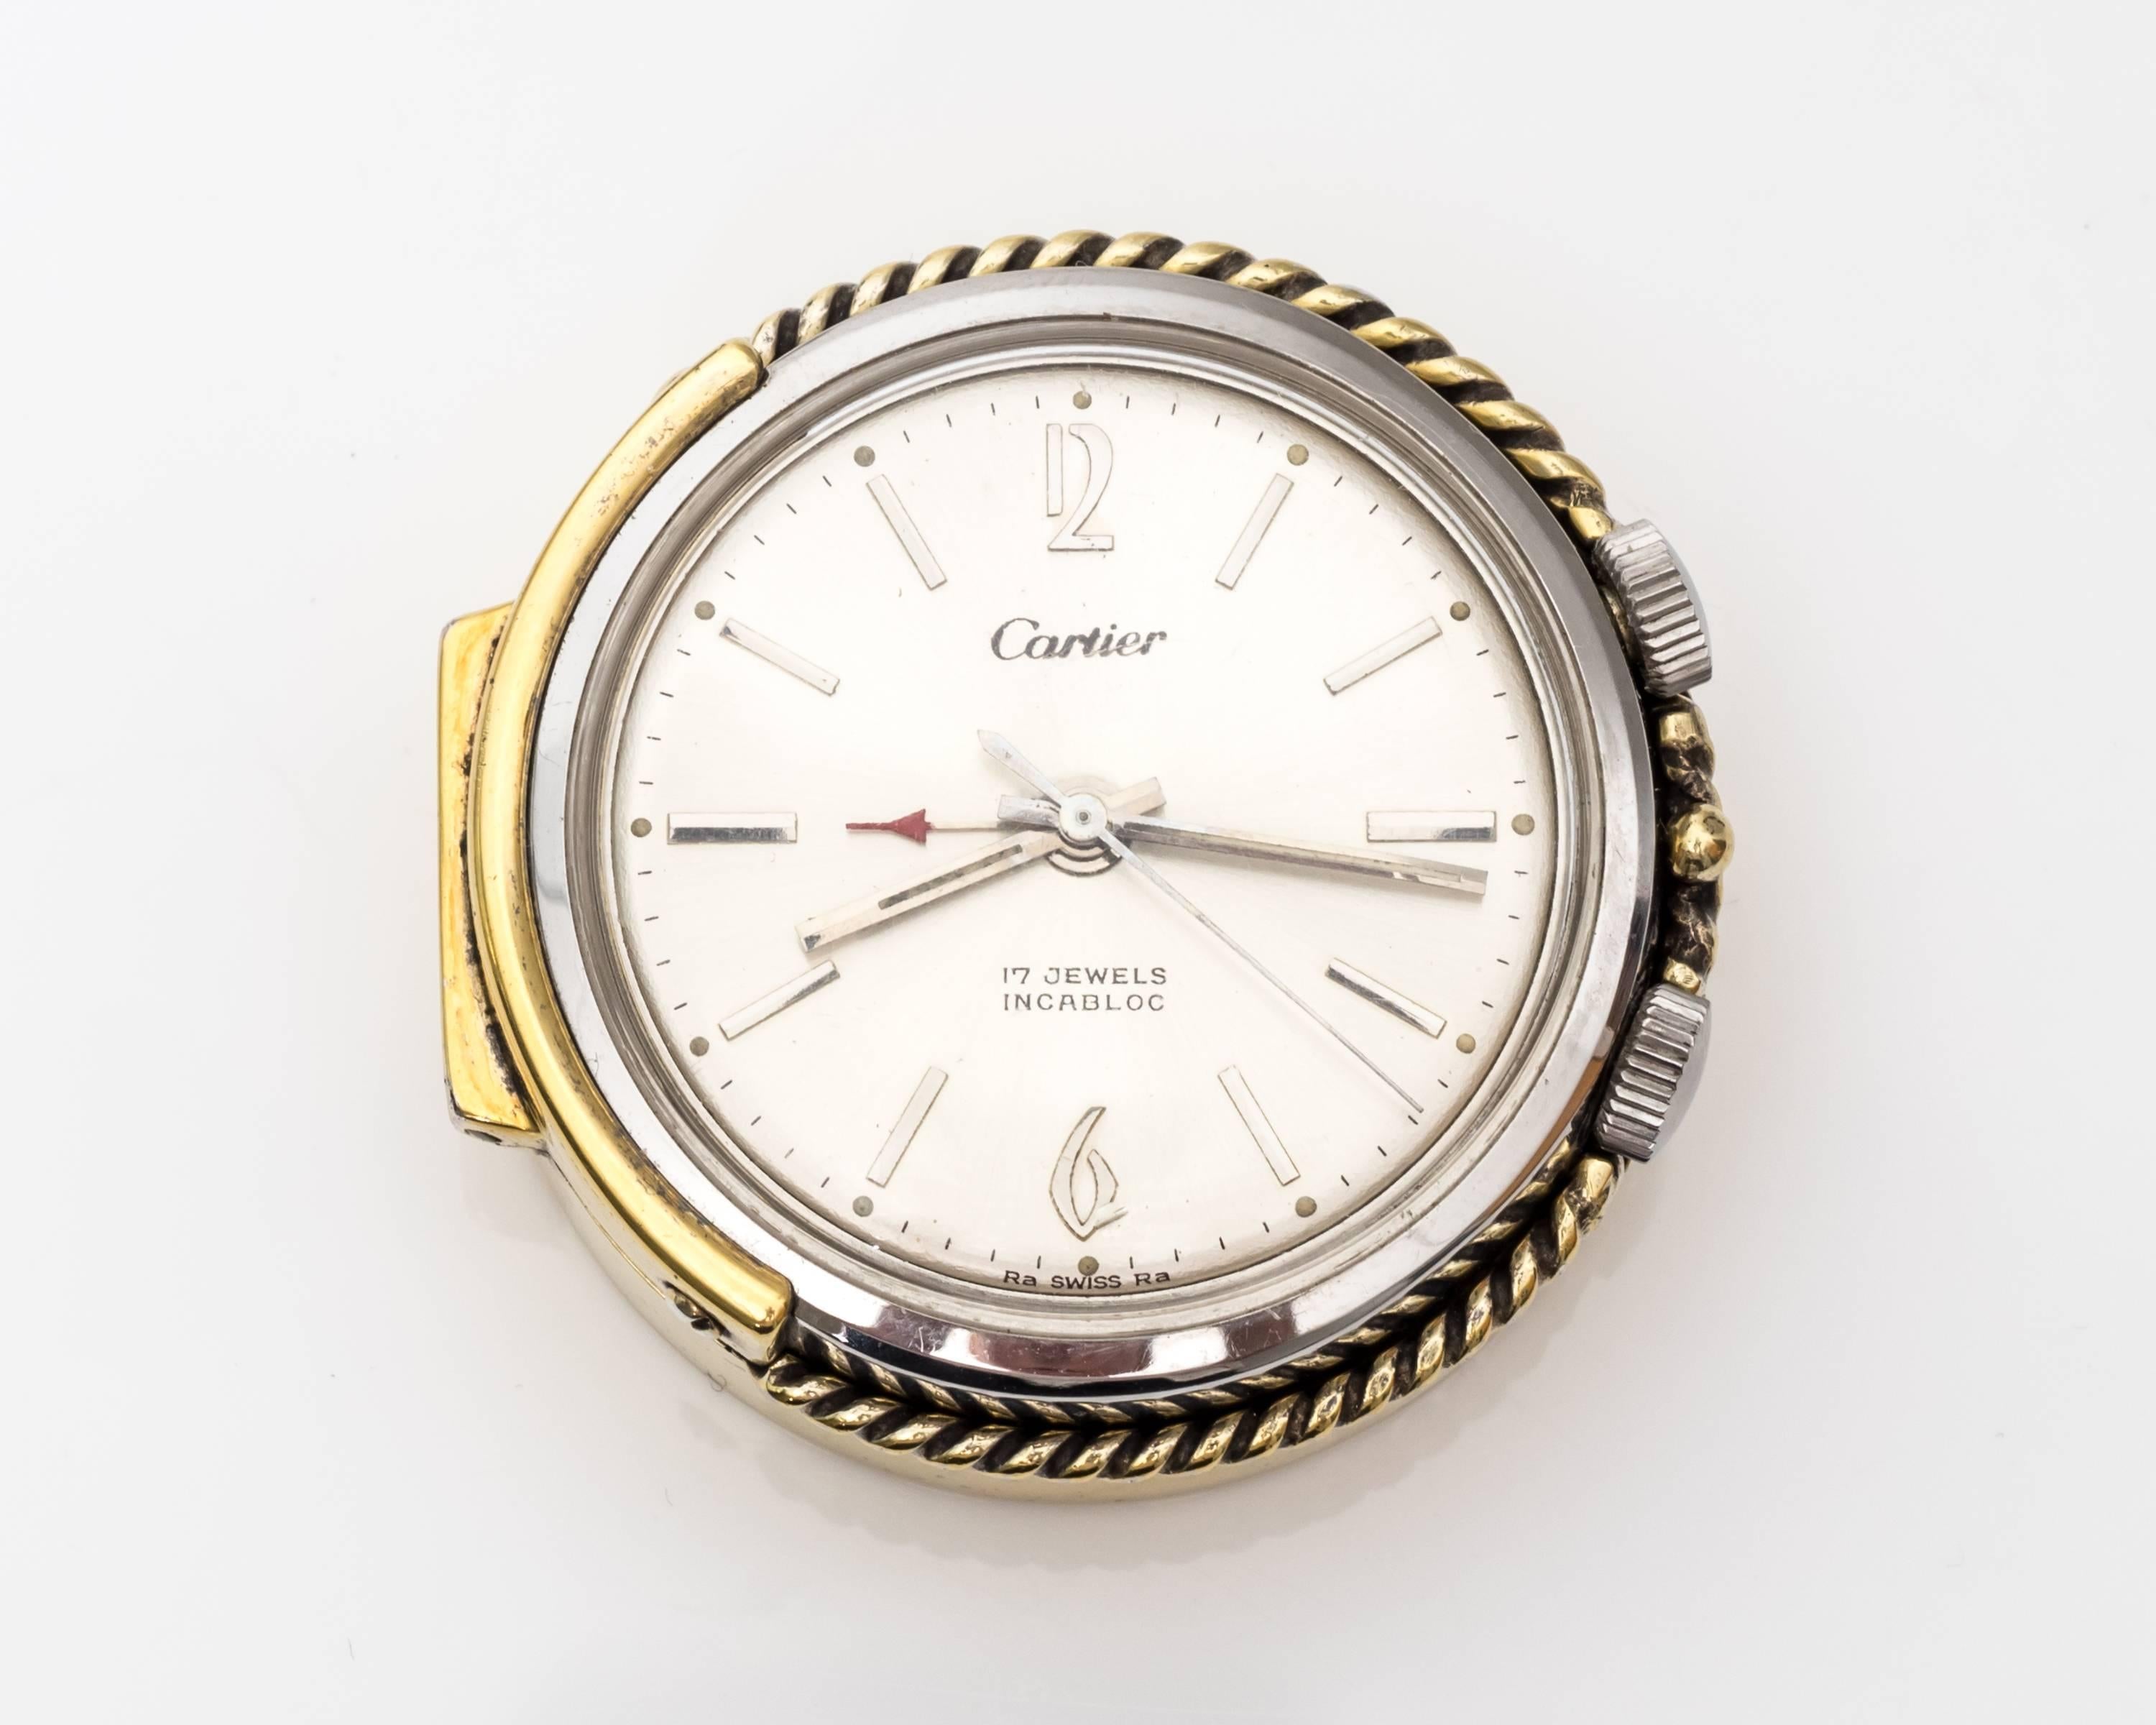 1950s Cartier Sterling Silver and Gold-Plated Travel Alarm Clock In Good Condition For Sale In Atlanta, GA